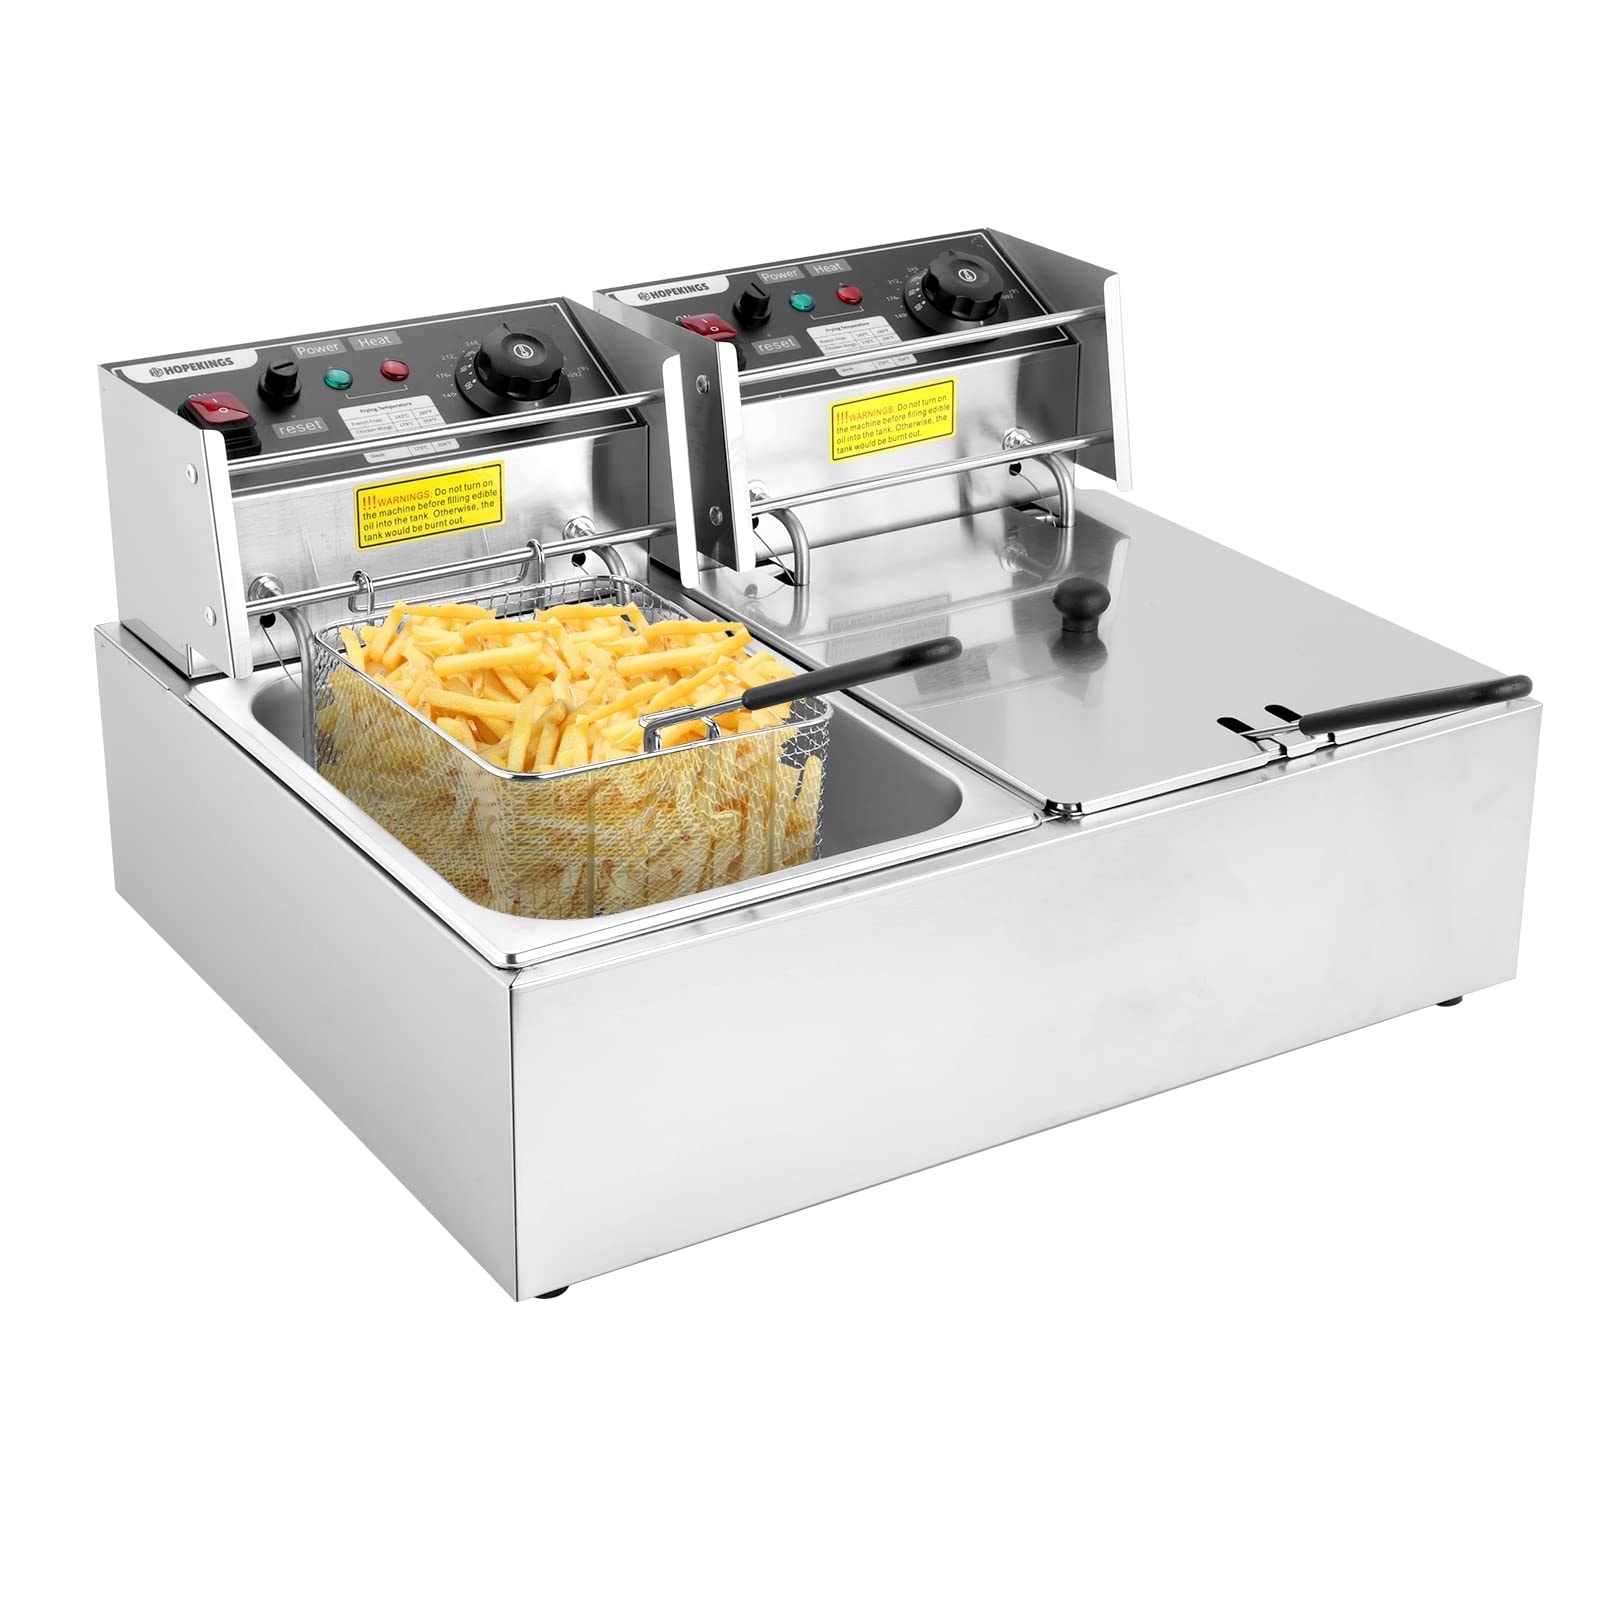 https://ak1.ostkcdn.com/images/products/is/images/direct/1a373a873bd88ece20a92ab4a9adc6edea77fd97/Commercial-Deep-Fryer-with-Basket-3400W-12.7QT-%286.34QT*2%29-Stainless-Steel-Countertop-Double-Electric-Oil-Fryer-for-Restaurant.jpg